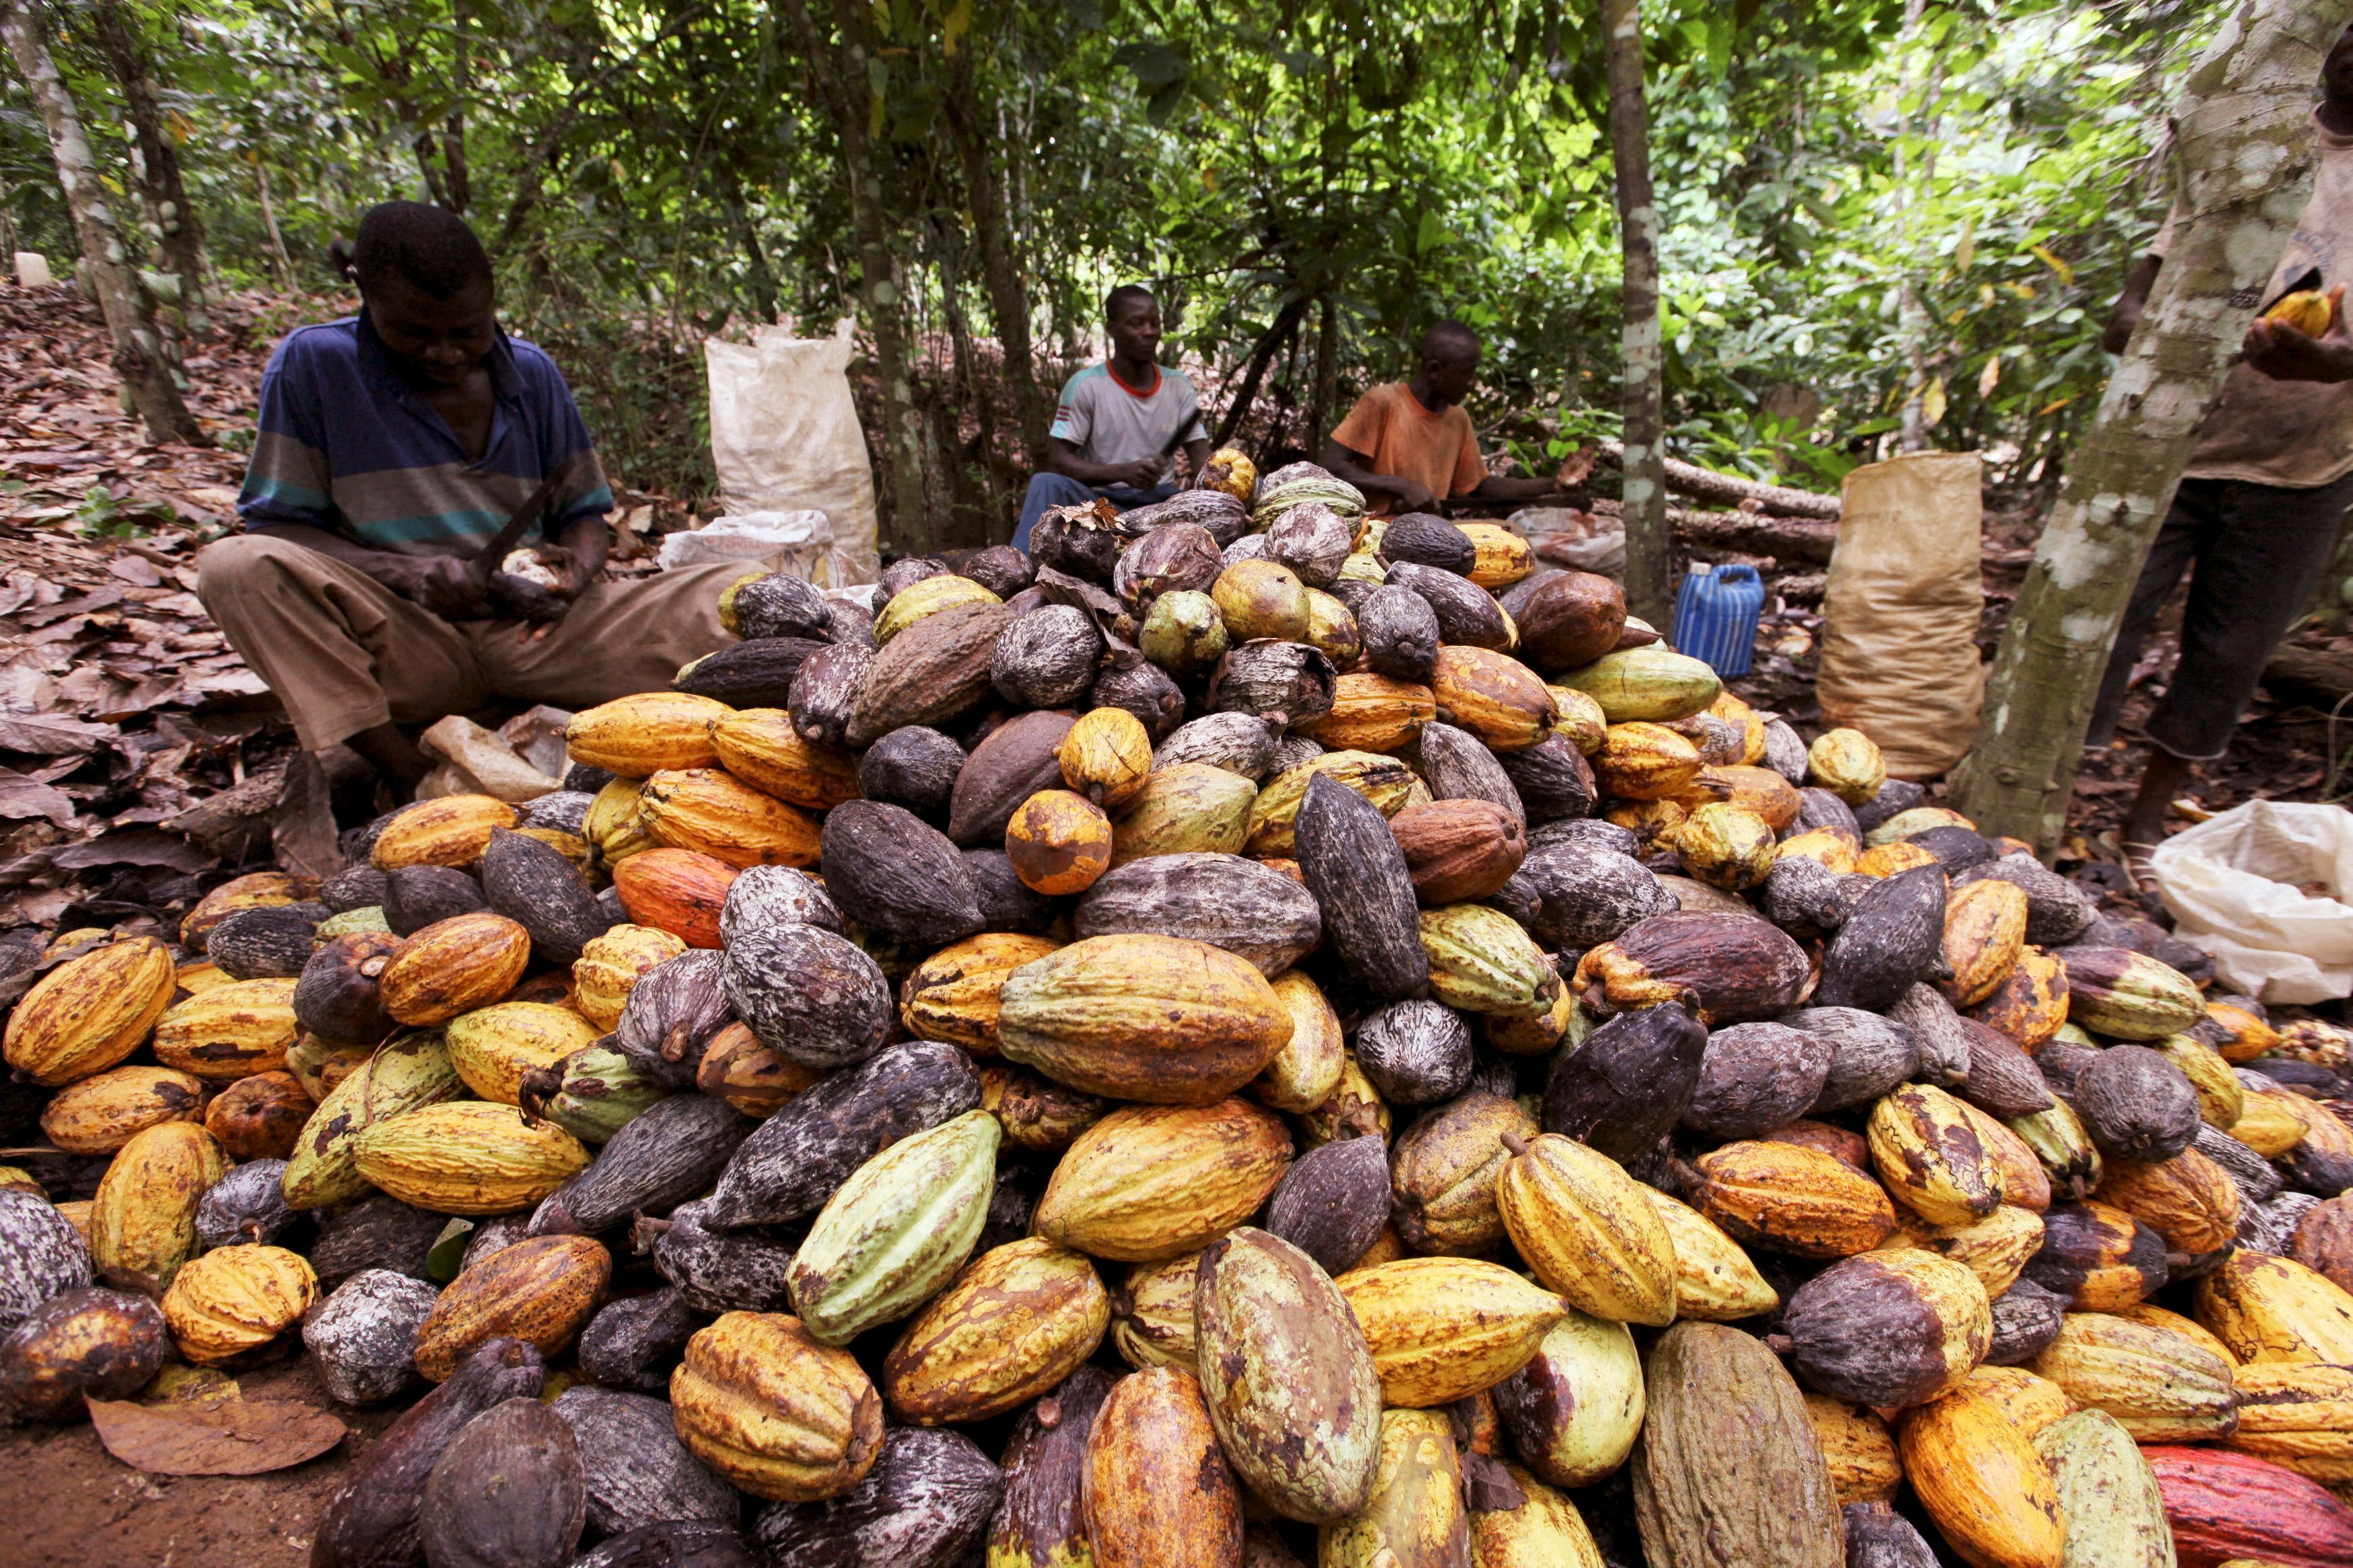 Farmers sit by a pile of cocoa pods at a farm in San Pedro, Ivory Coast